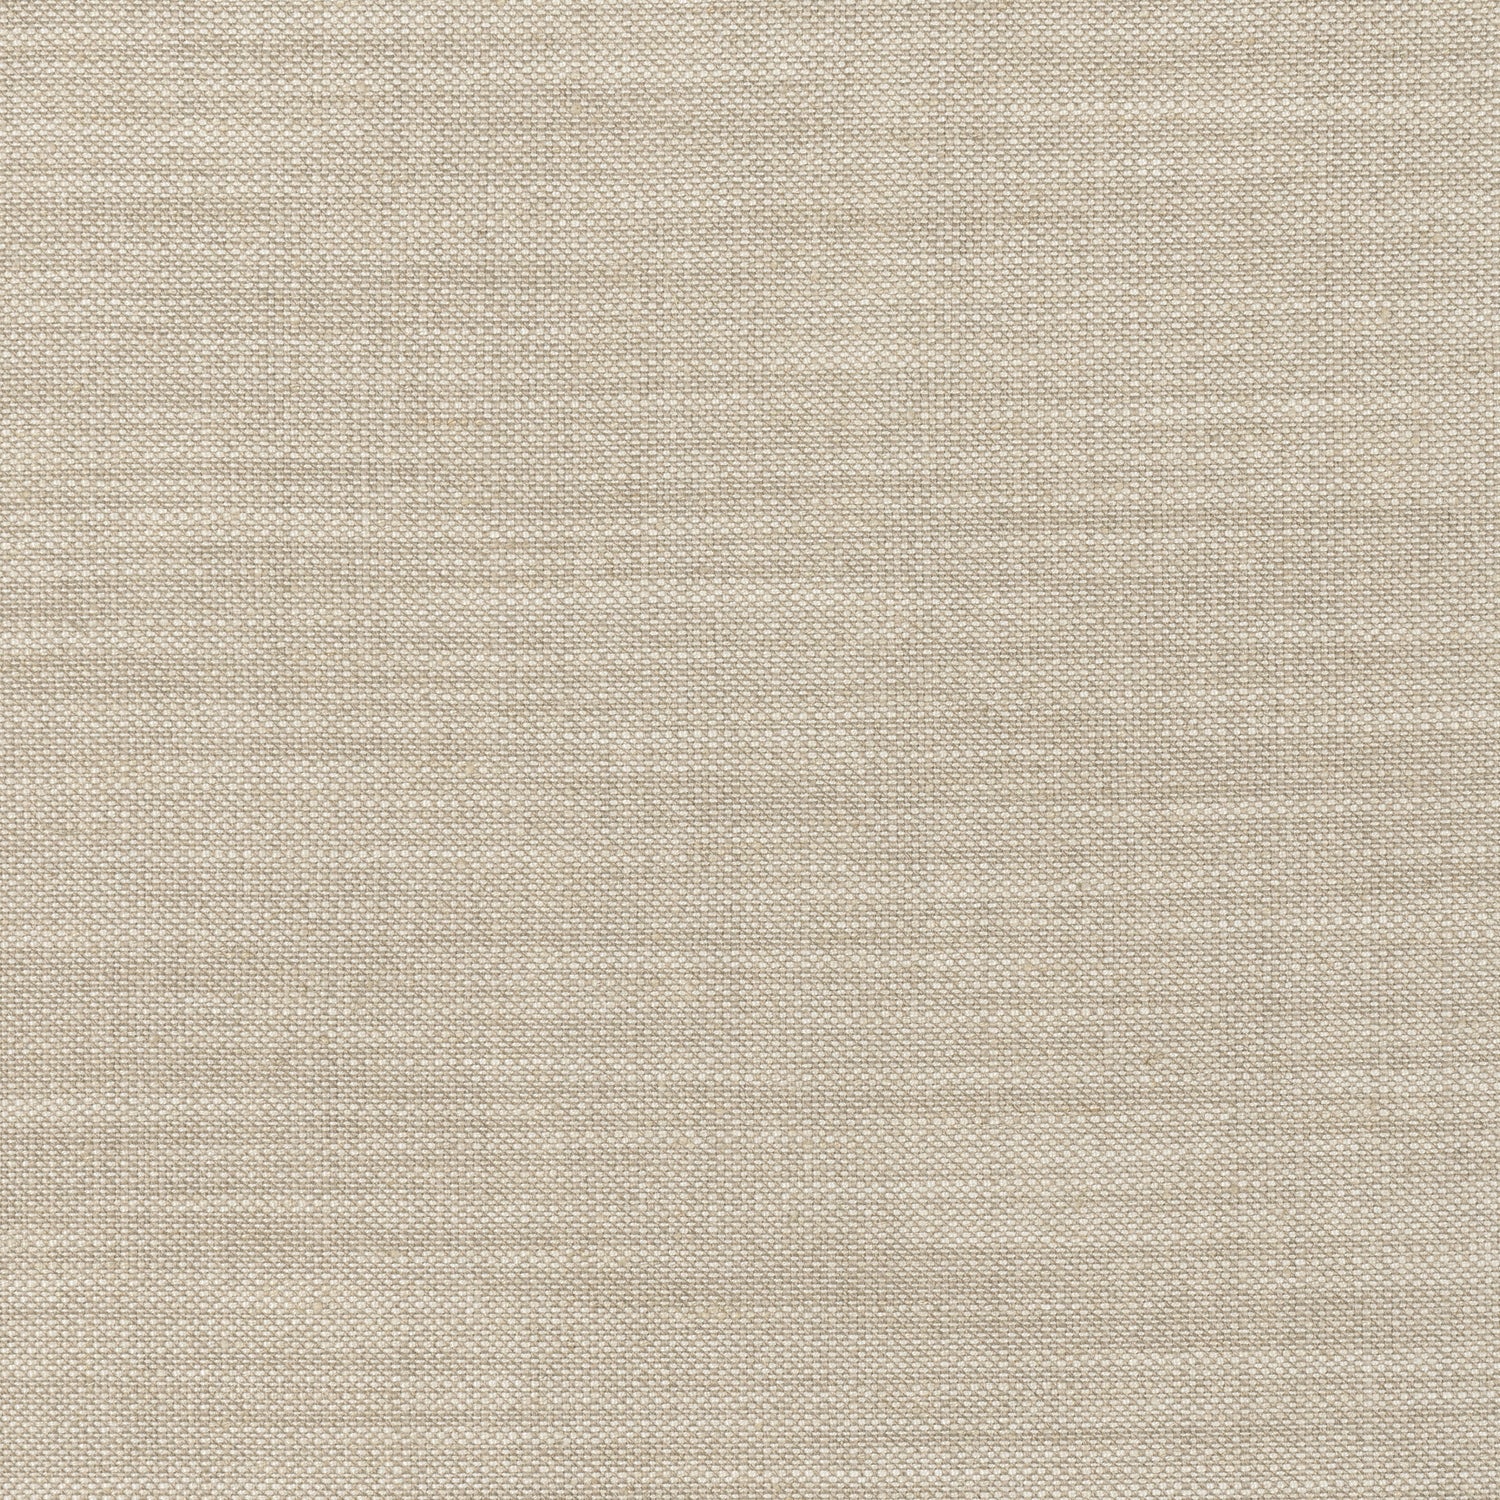 Terra Linen fabric in stone color - pattern number FWW7689 - by Thibaut in the Palisades collection